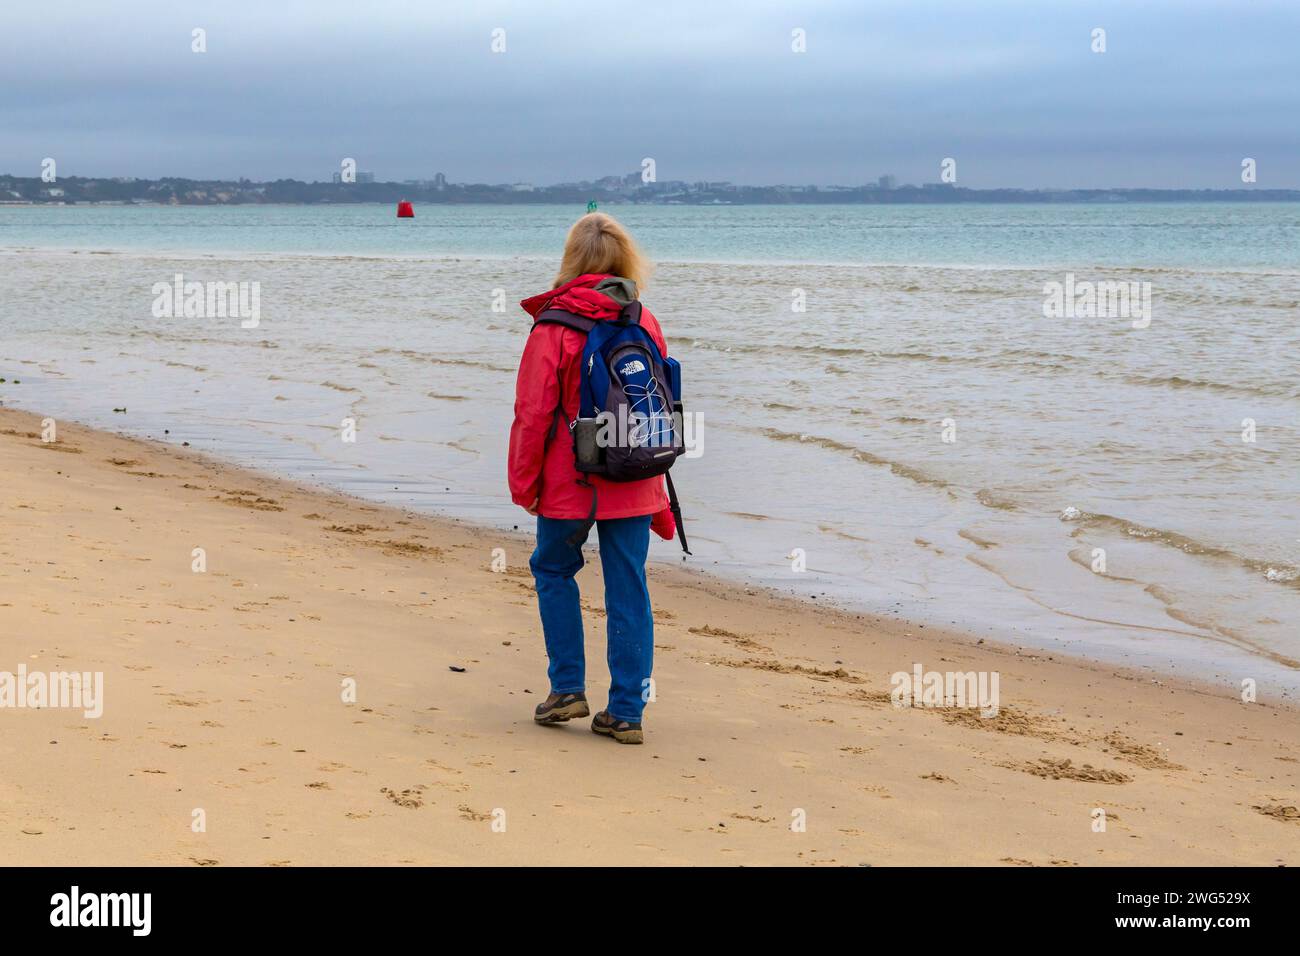 Studland, Dorset UK. 3rd February 2023. UK weather: cloudy, but mild at Studland beach as visitors head to the seaside for some fresh air and exercise. Credit: Carolyn Jenkins/Alamy Live News Stock Photo